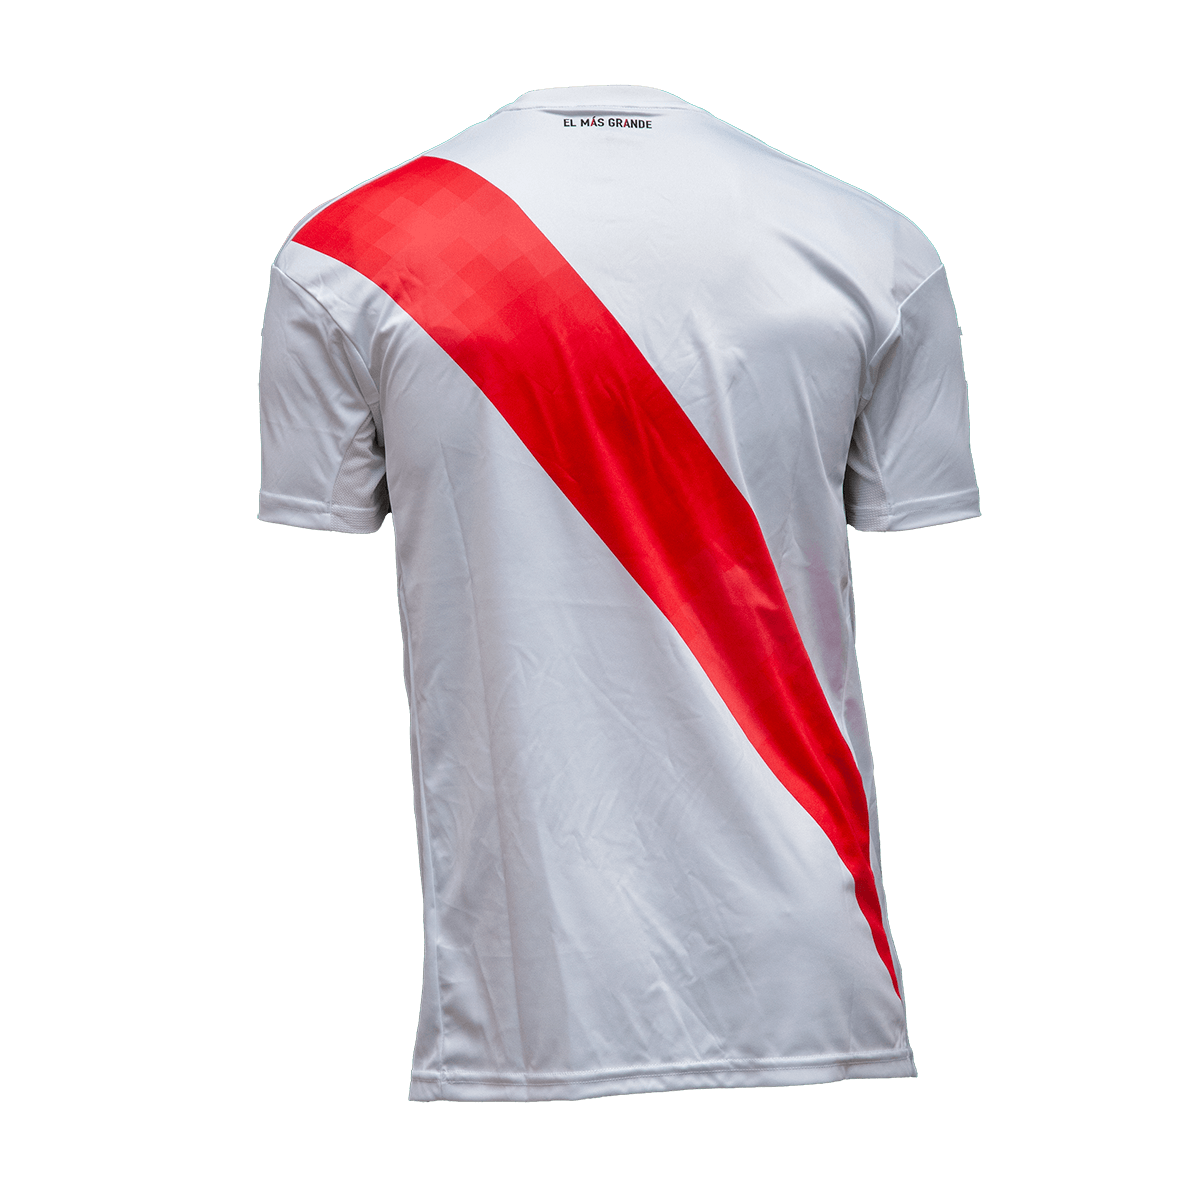 River Plate 2020 Home